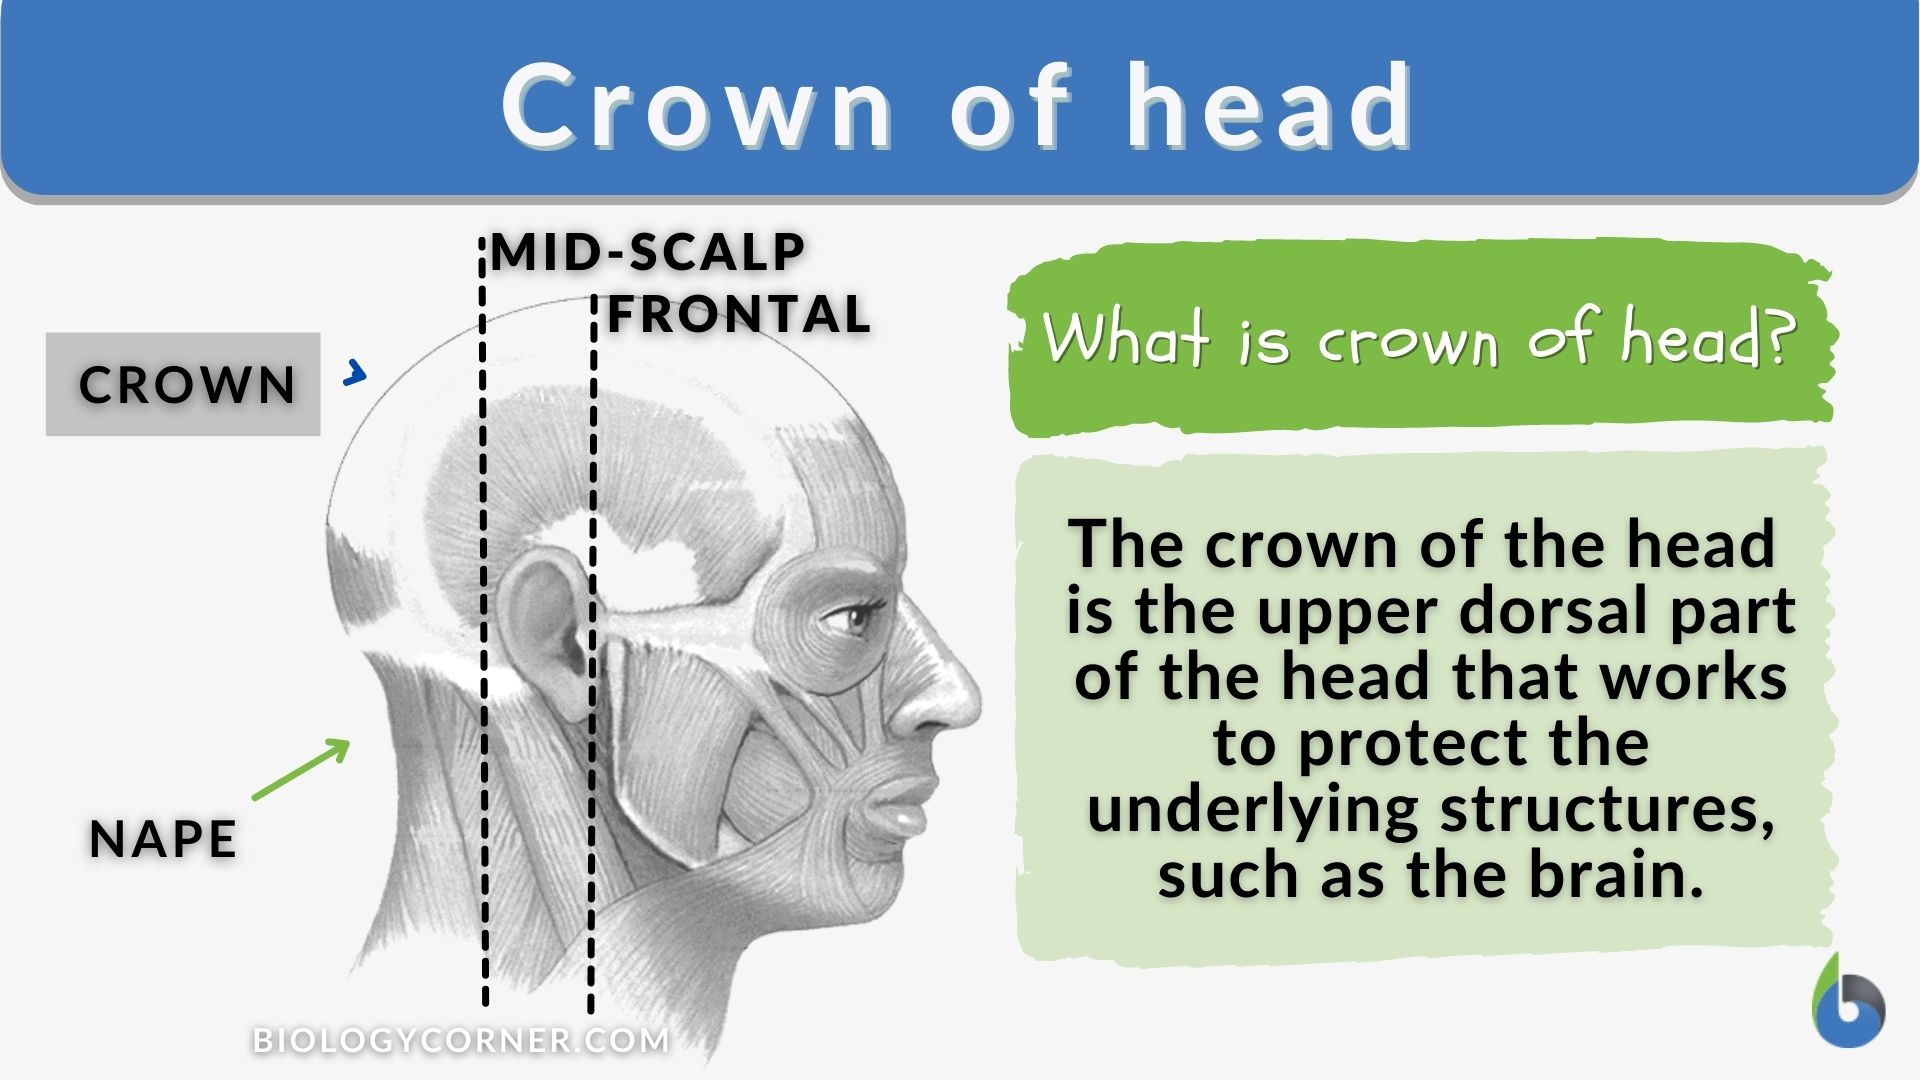 Crown of head - Definition and Examples - Biology Online Dictionary